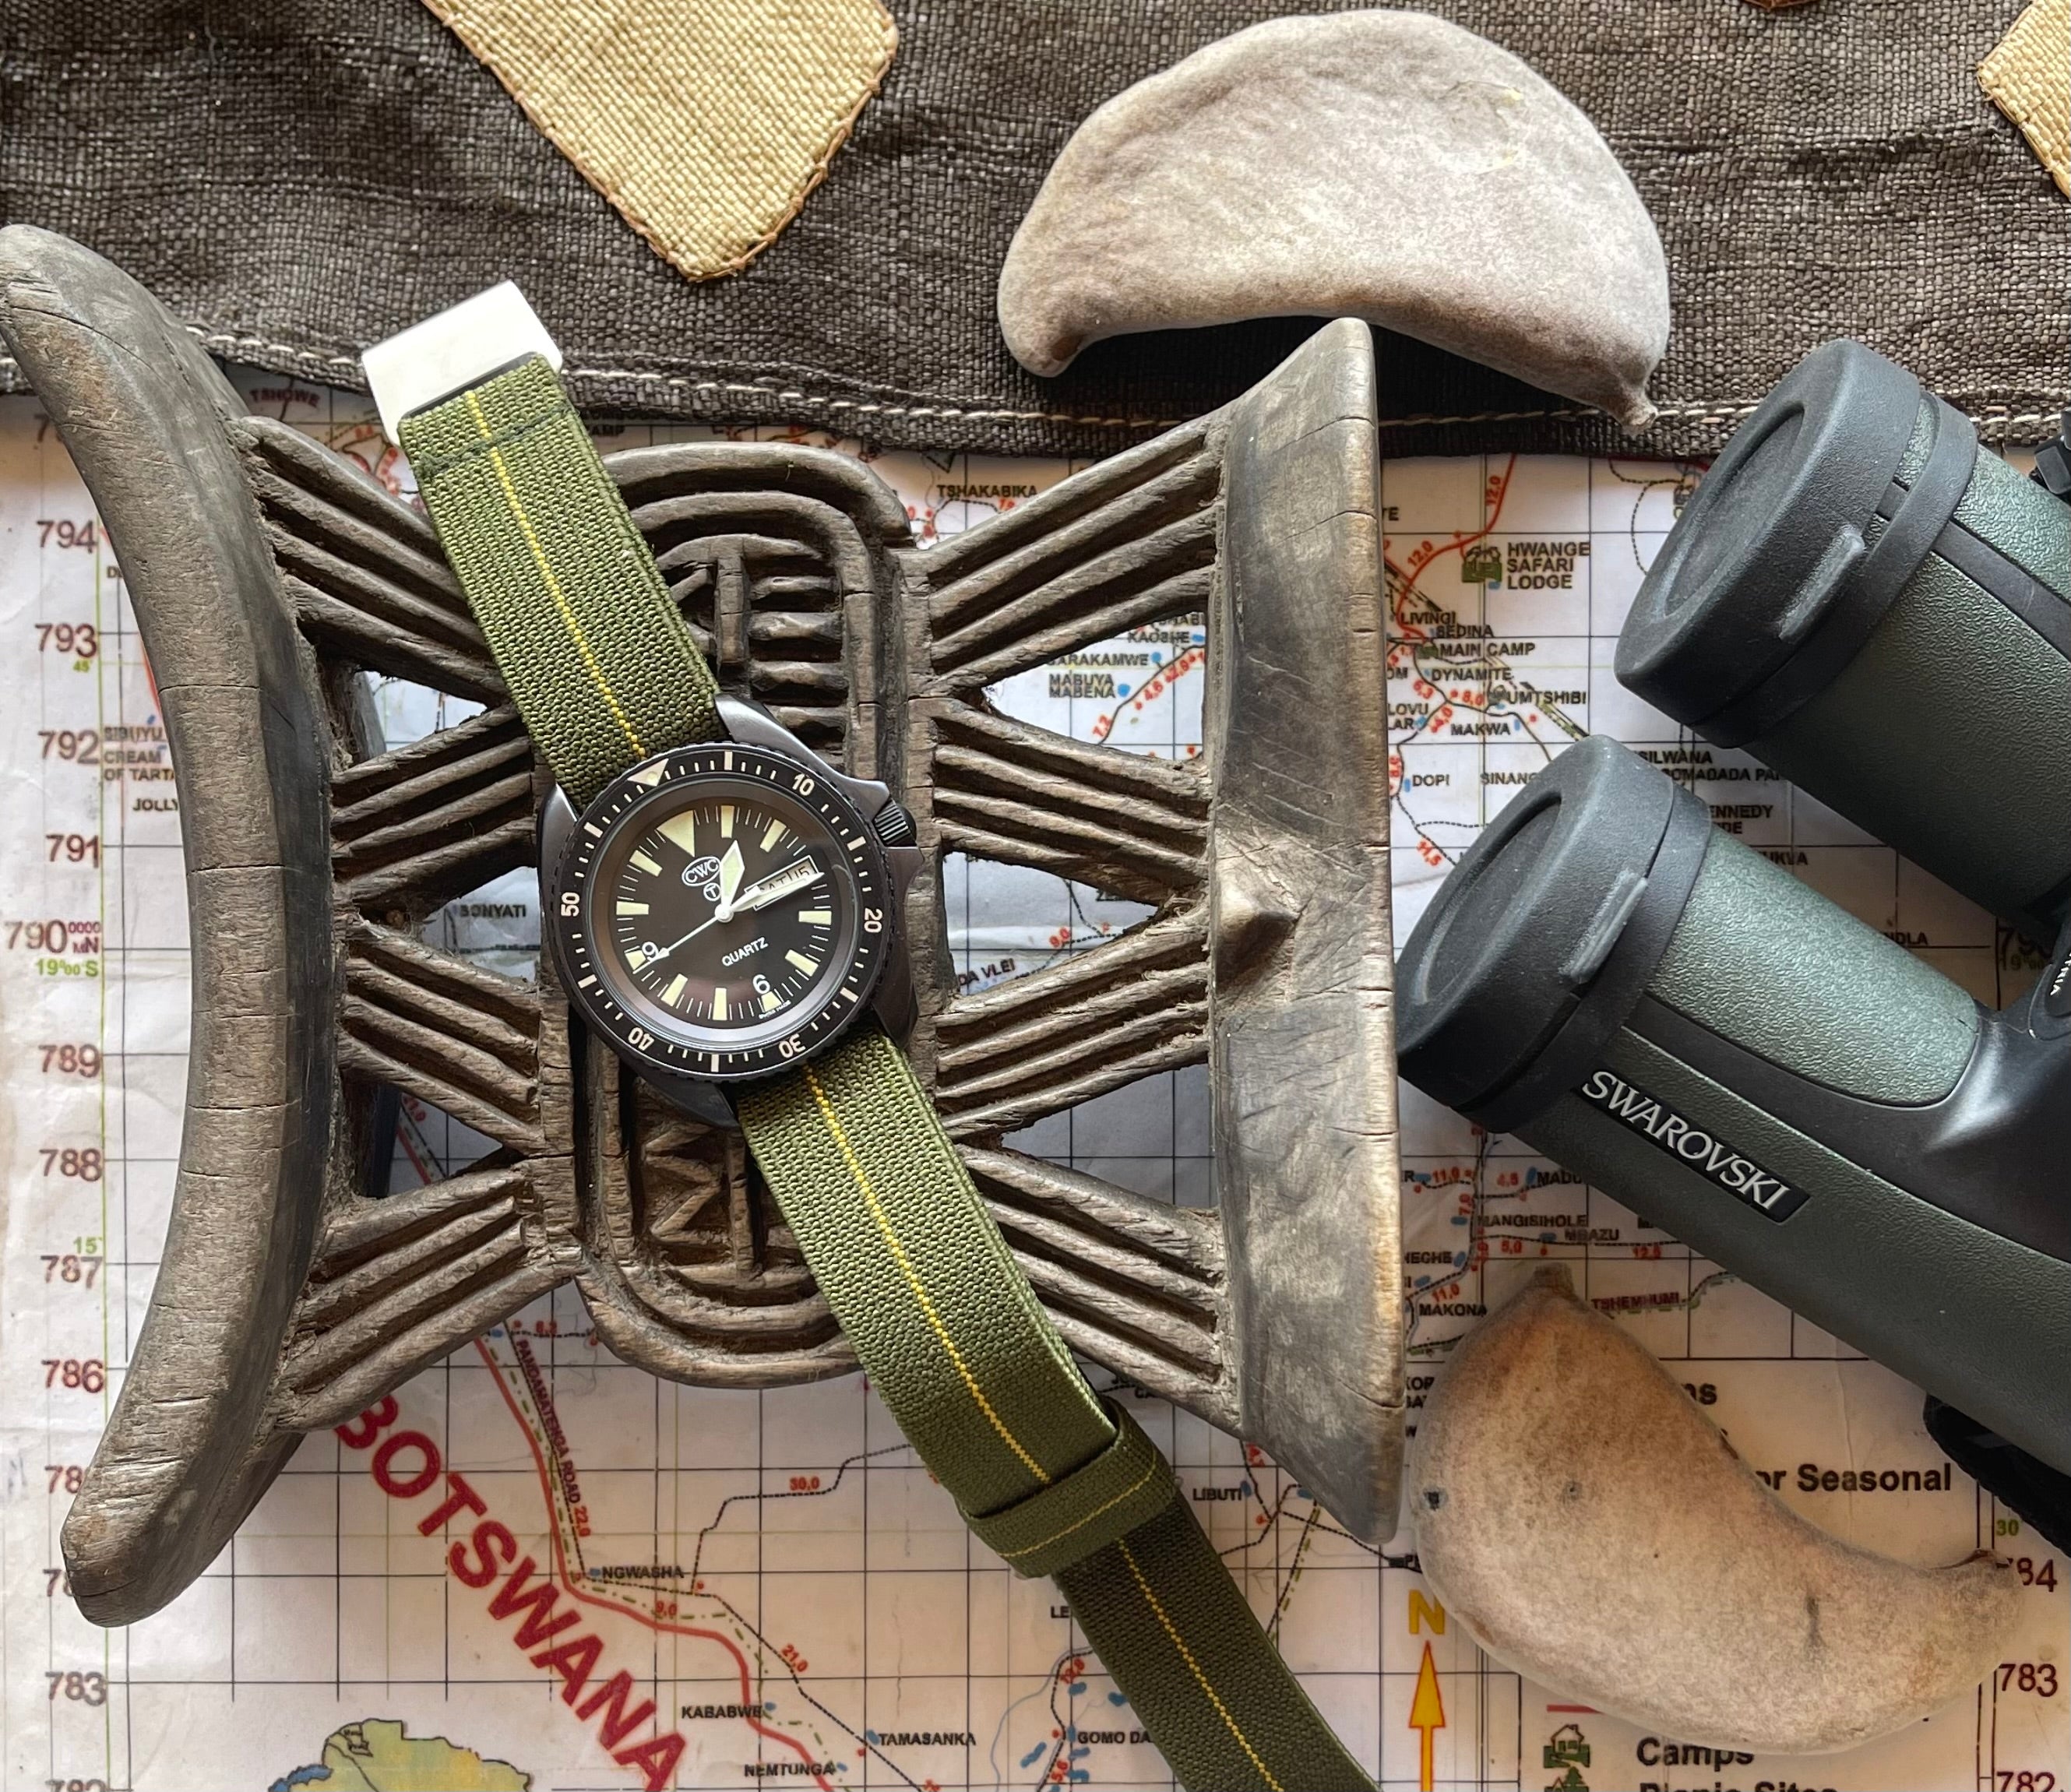 Timepiece Crime and Traveling with Watches, Africa Watch Loadout, Part II